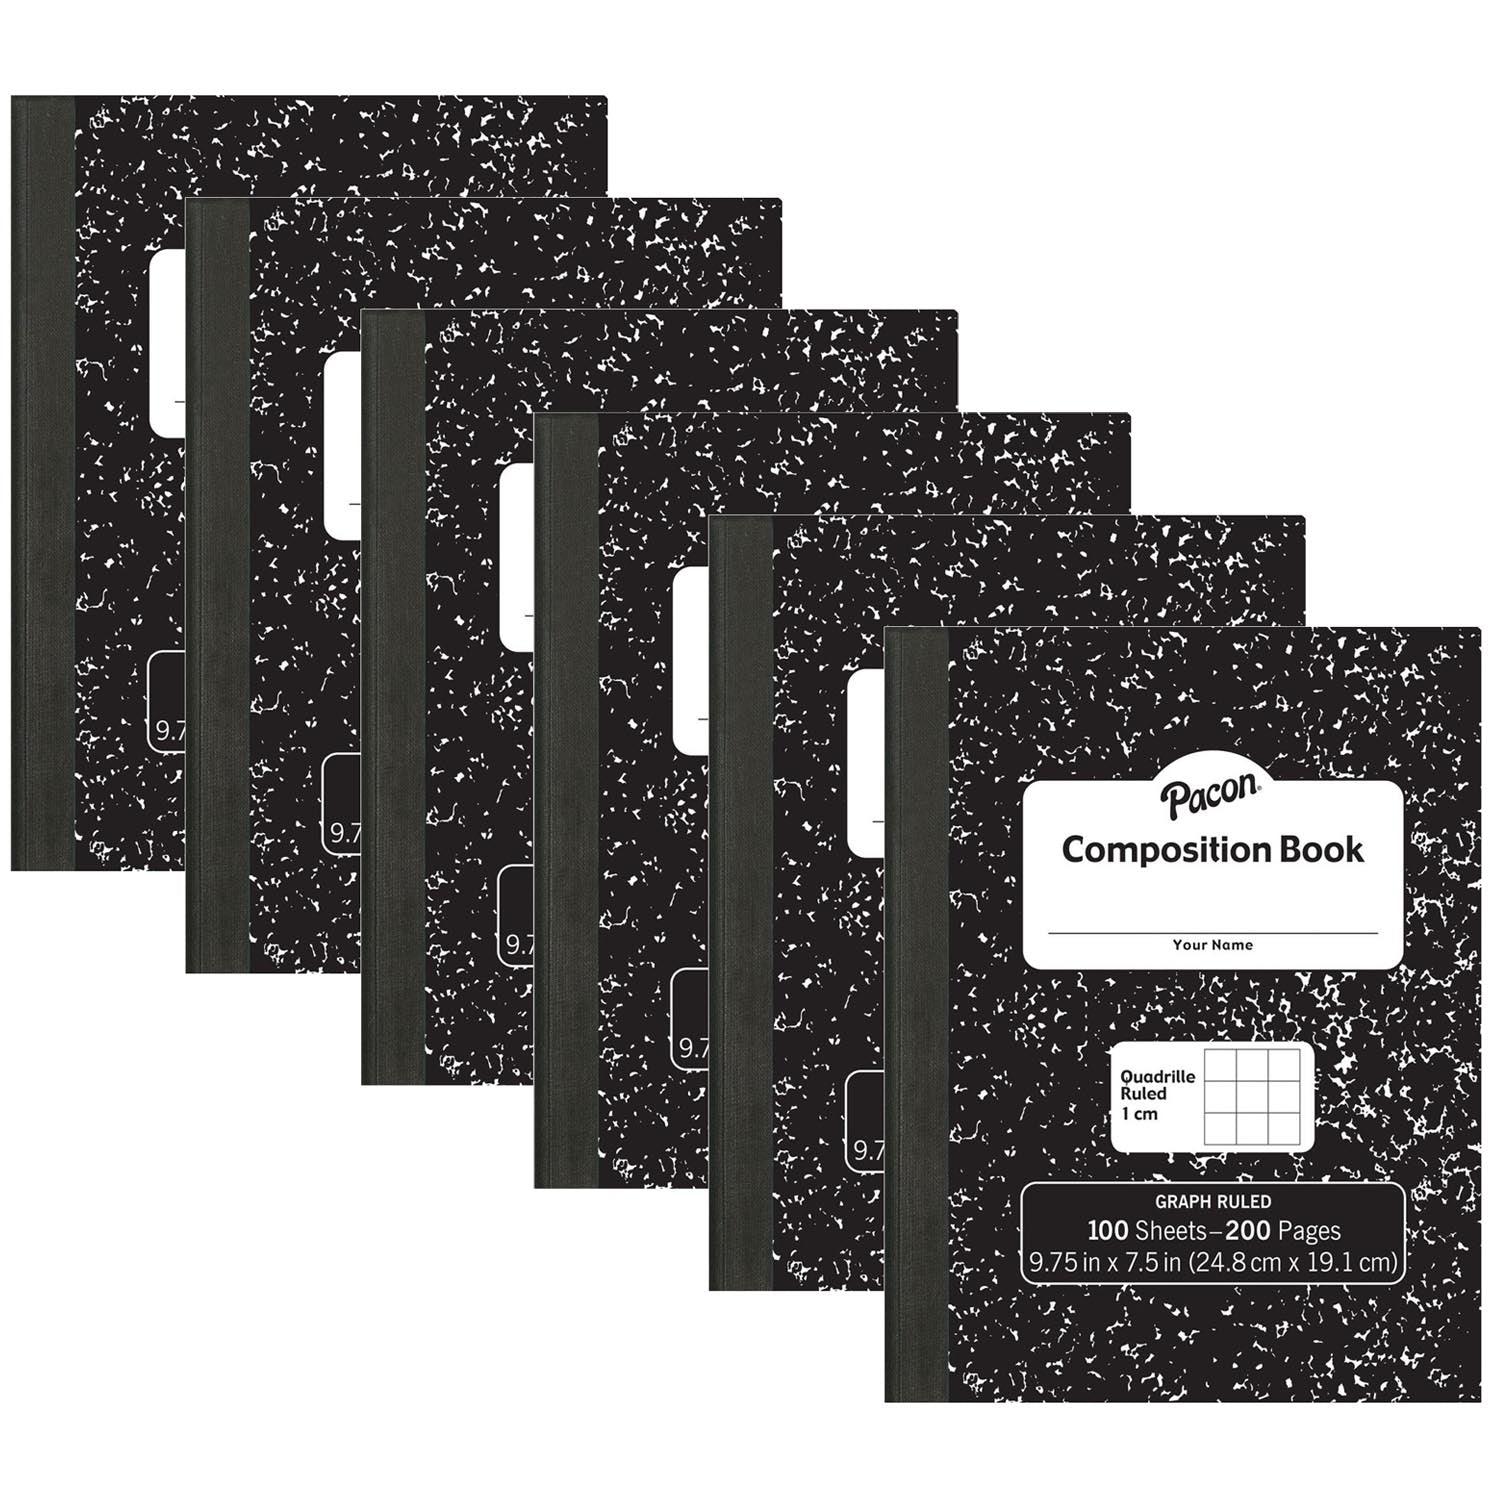 Composition Book, Black Marble, 1 cm Quadrille Ruled 9-3/4" x 7-1/2", 100 Sheets, Pack of 6 - Loomini